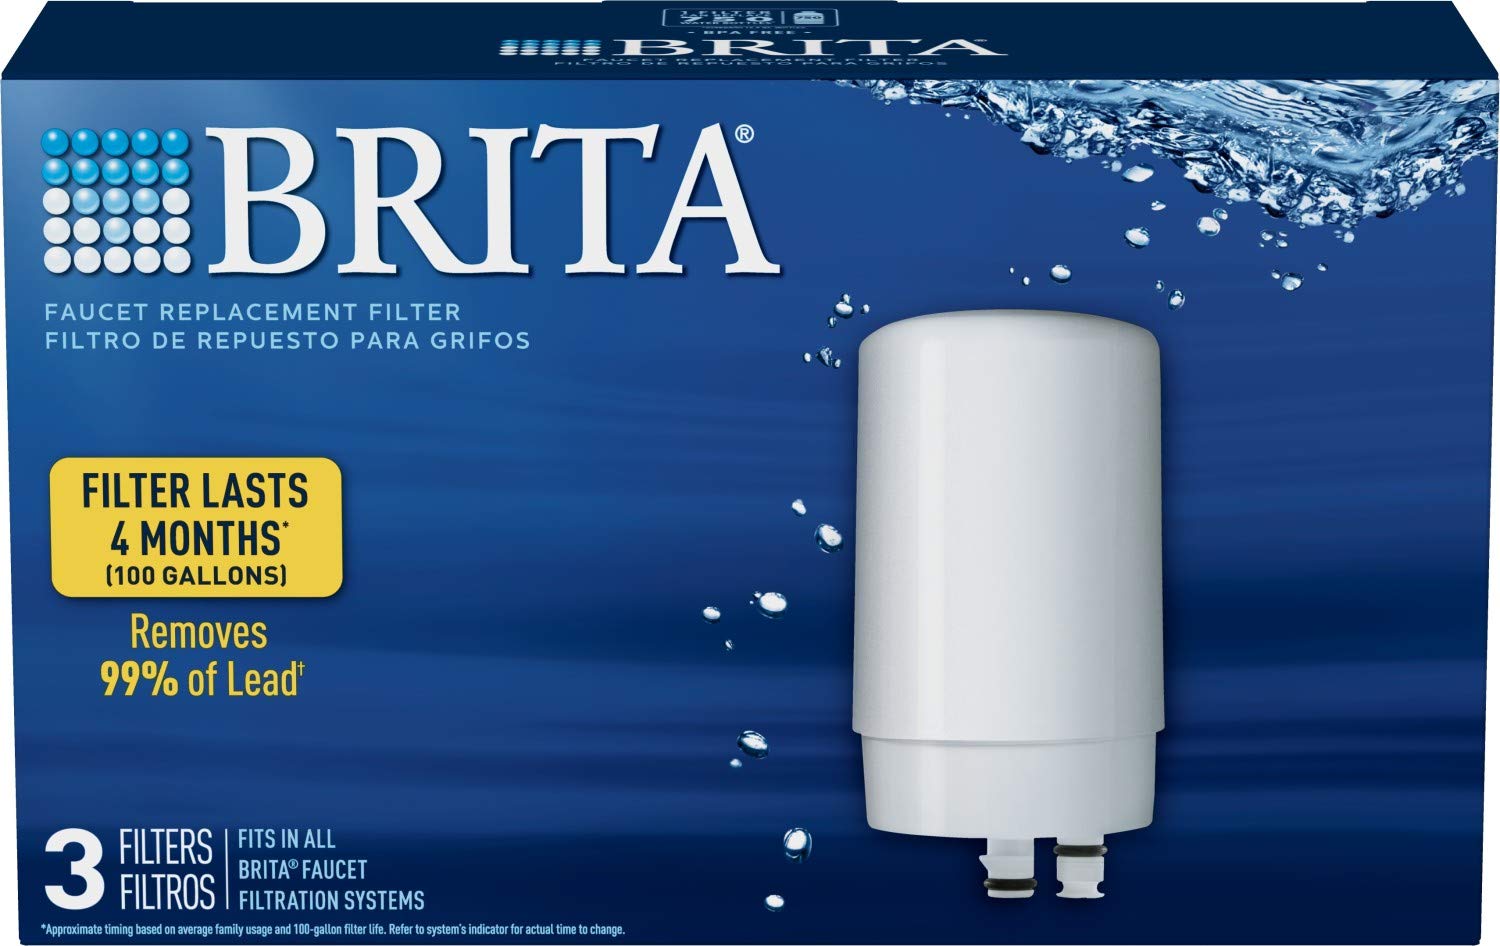 Brita Tap Water Filtration System Replacement Filters for Faucets, 3 Count, White, 3 & Tap Water Filter System, Water Faucet Filtration System with Filter Change Reminder, Reduces Lead, White